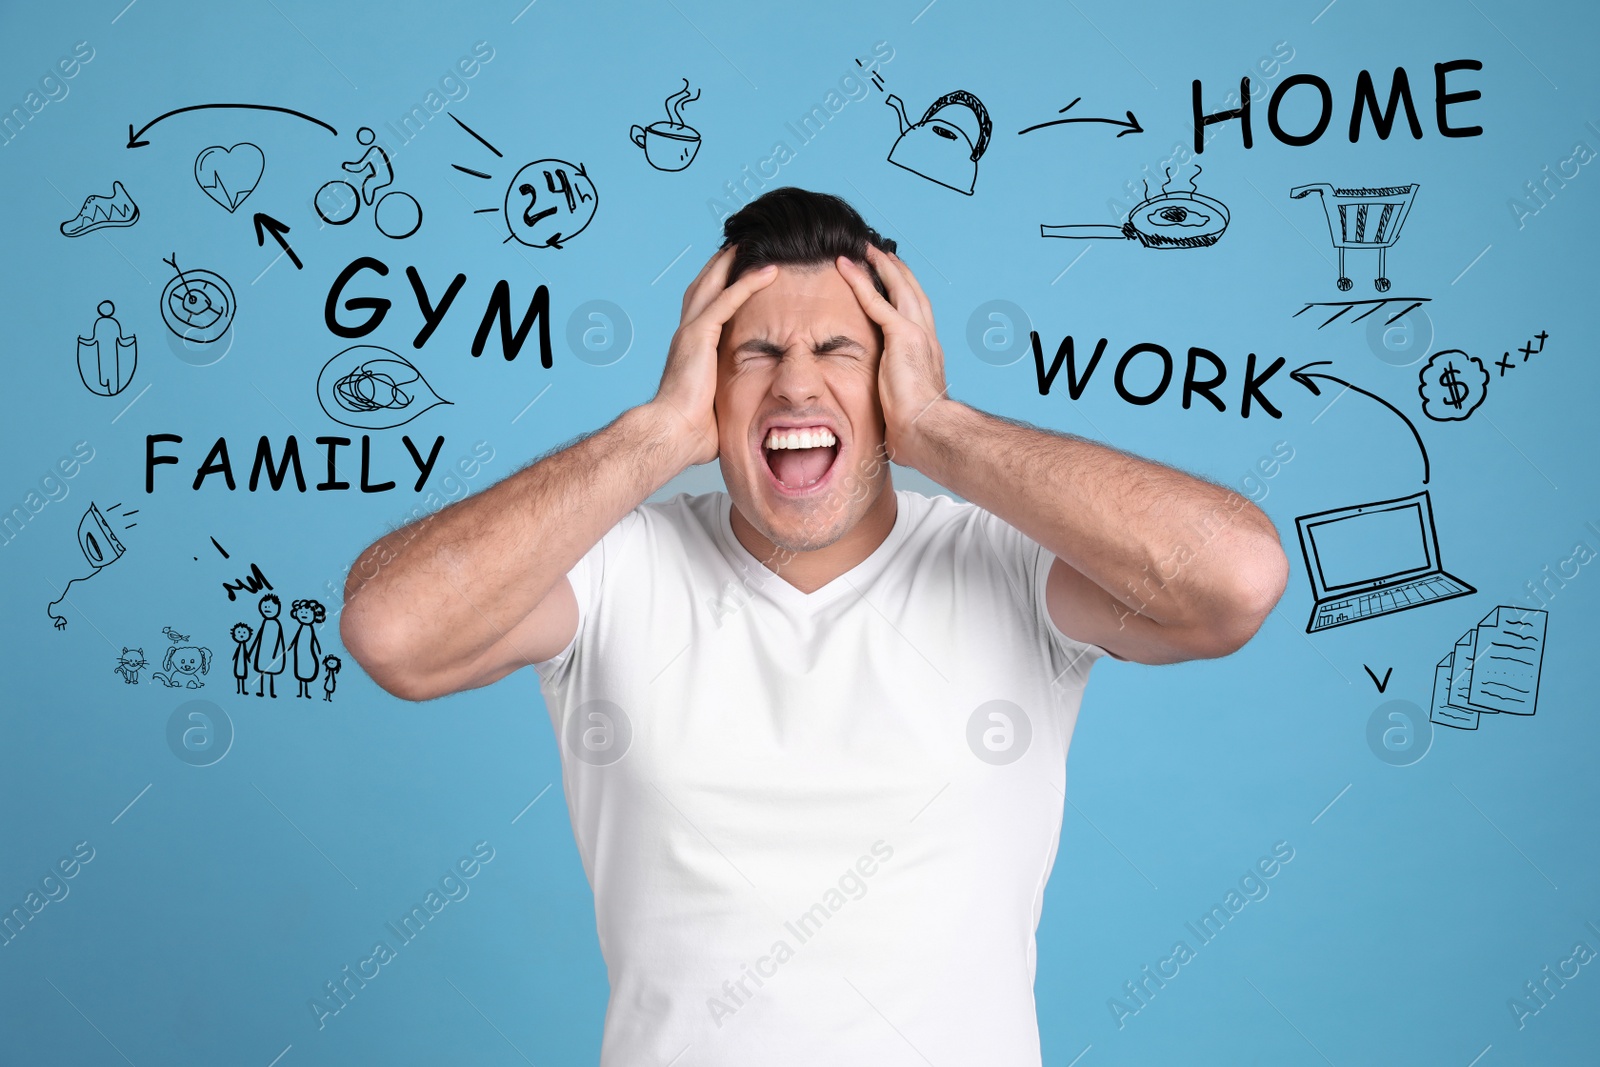 Image of Stressed man, text and drawings on light blue background